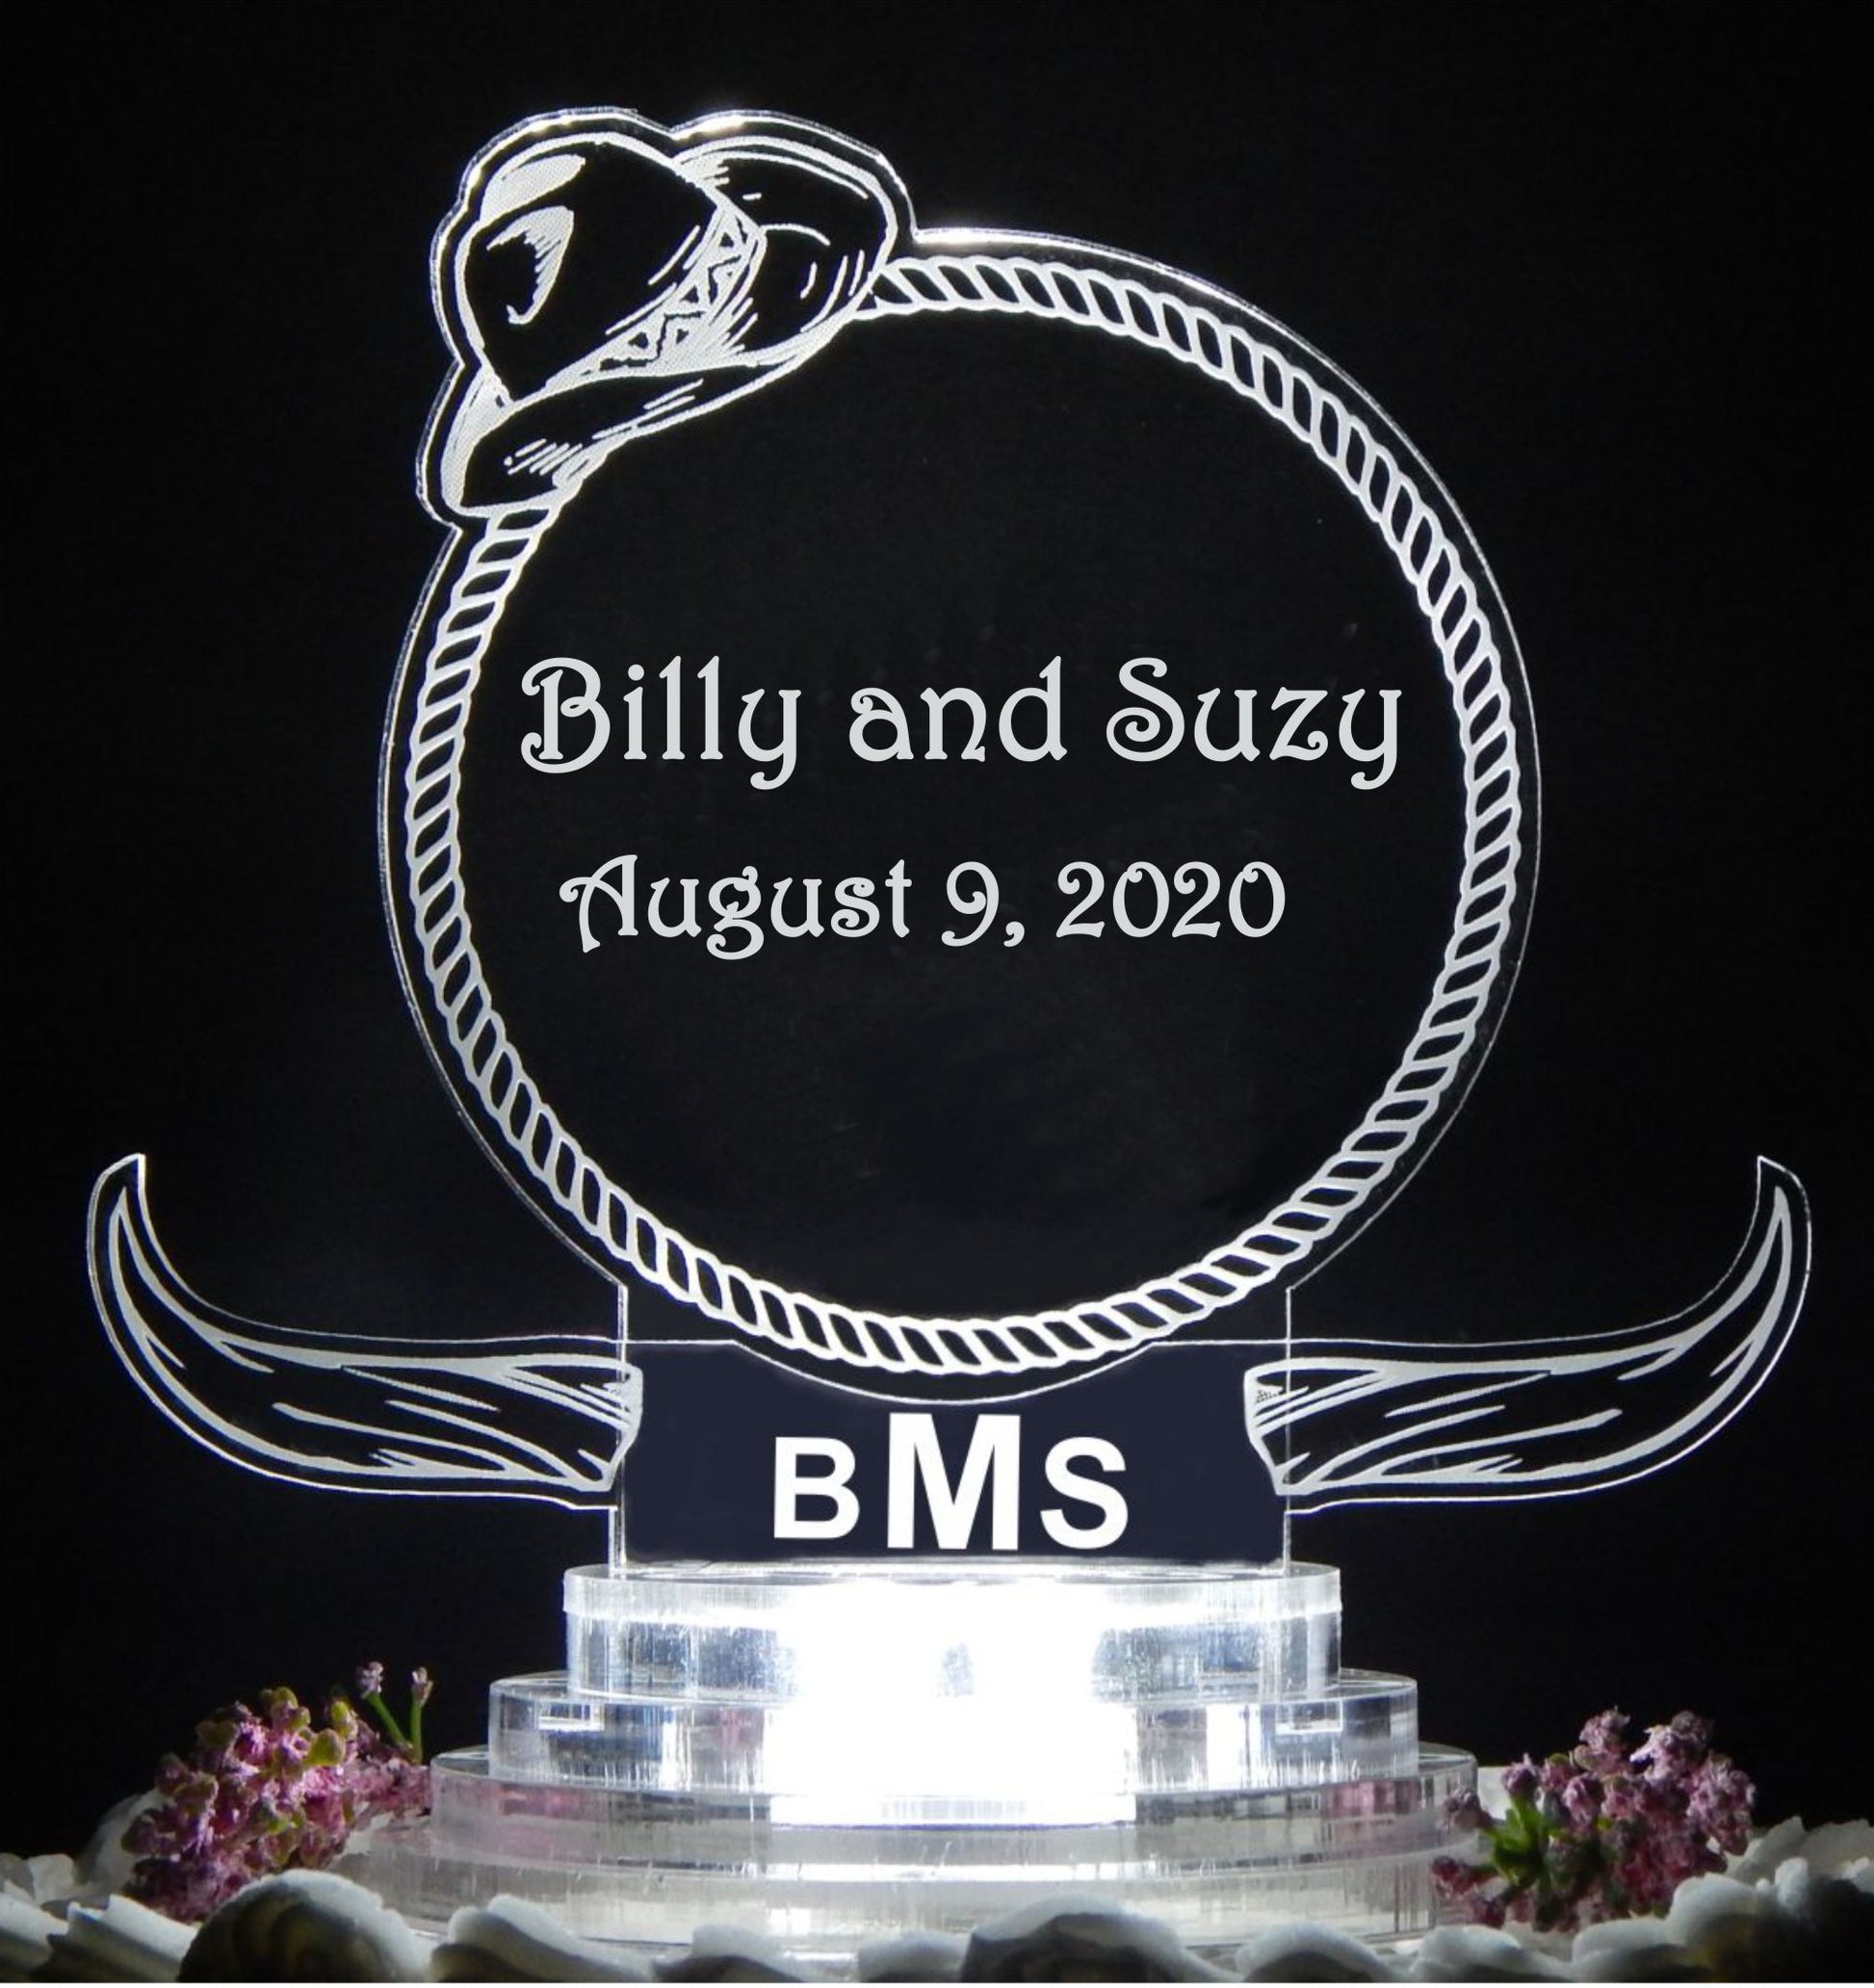 clear acrylic cake topper designed in a western cowboy theme with steer horns and cowboy hat, engraved with names and date